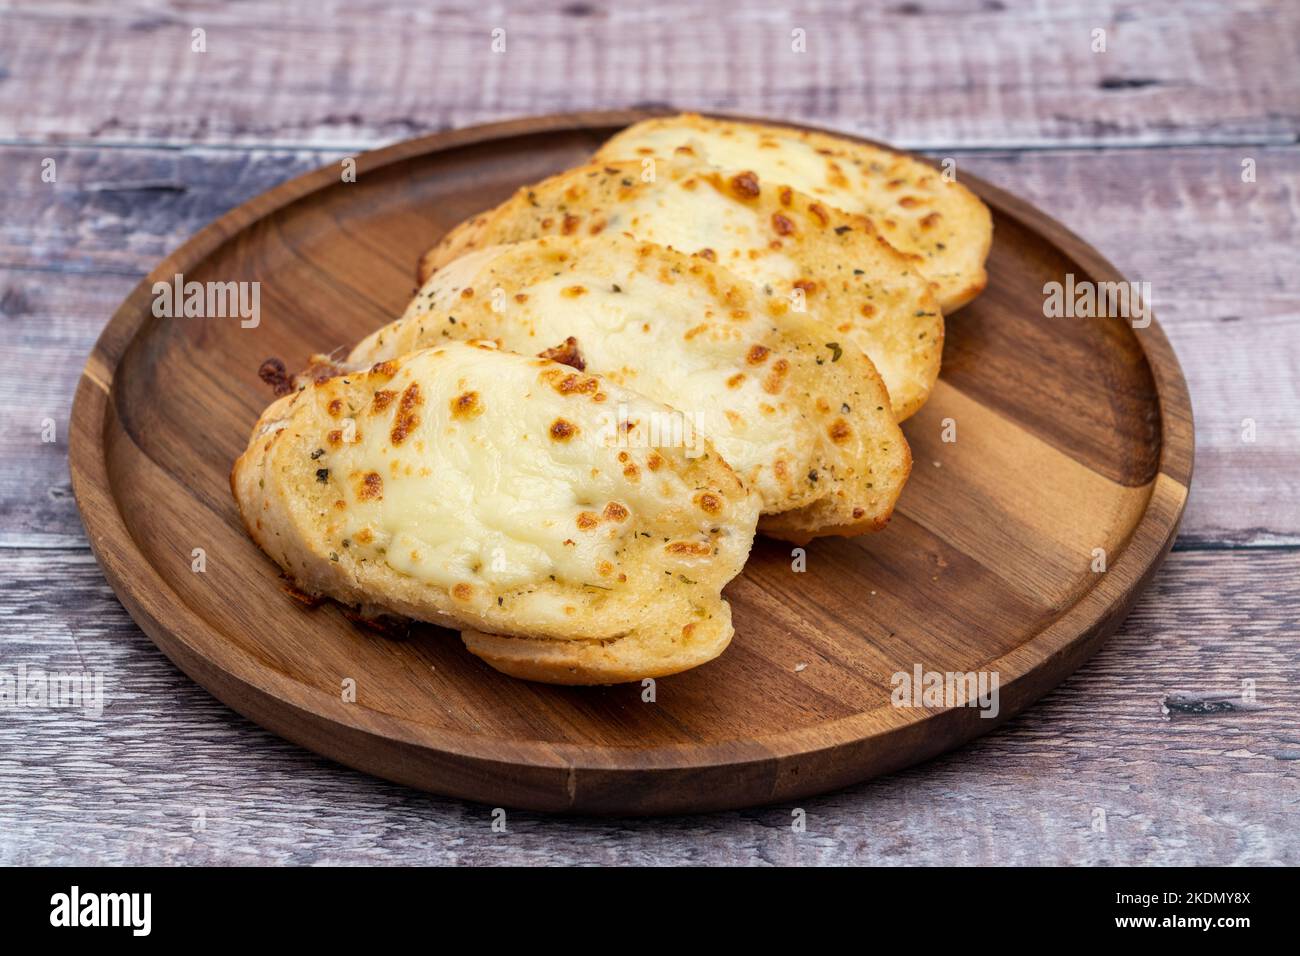 Hot slices of garlic bread with cheese Stock Photo